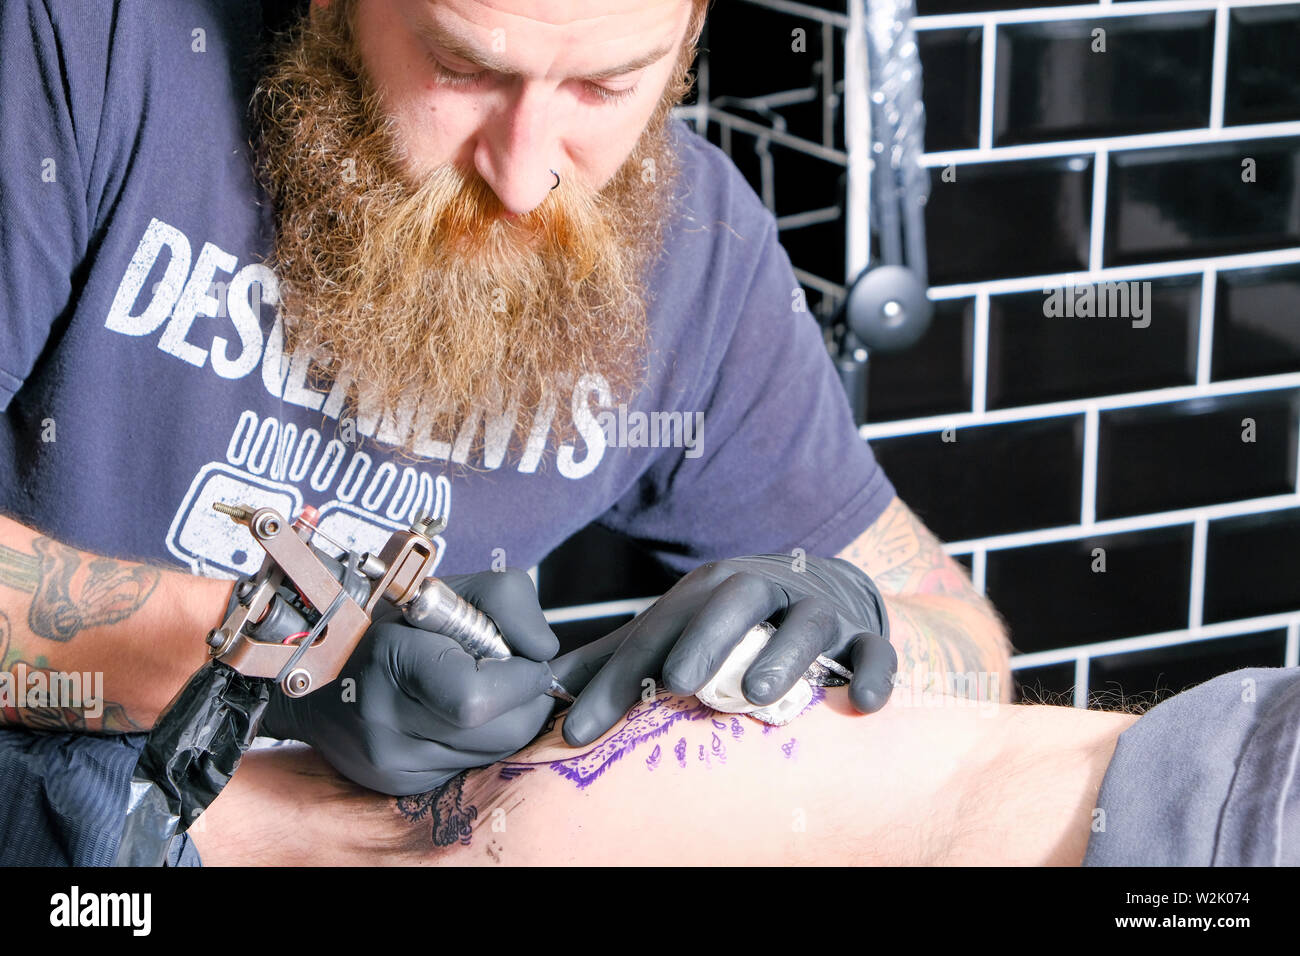 A Tattooist or tattoo artist works on a client creating a tattoo or piece of body art using an electric tattoo machine. Stock Photo